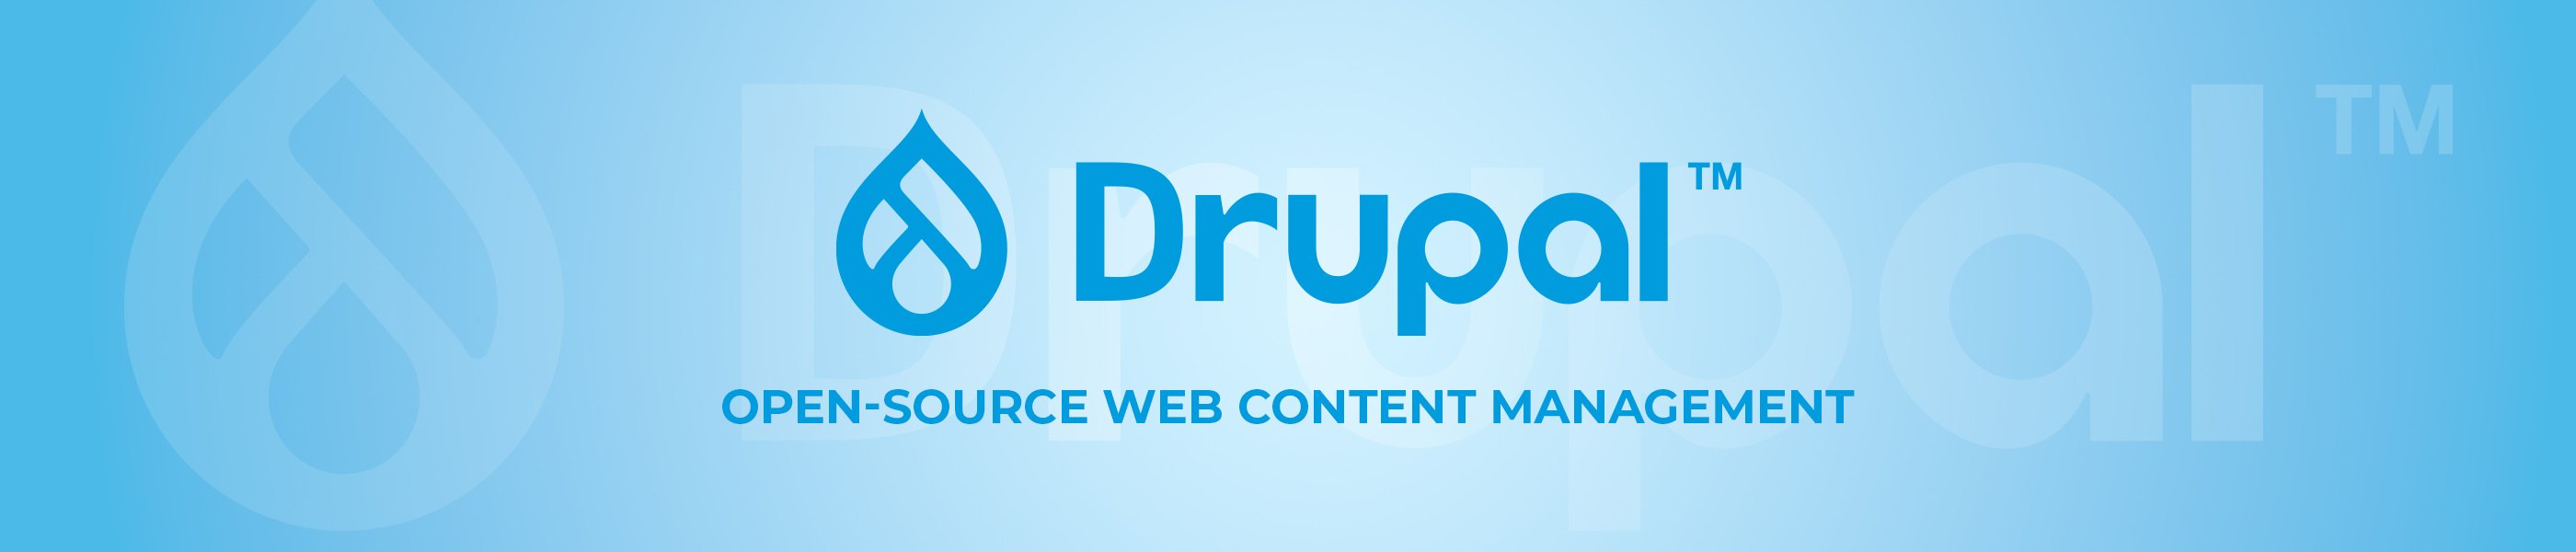 Expert Drupal Consulting Services from W4 Agency. Drupal - open-source web content management